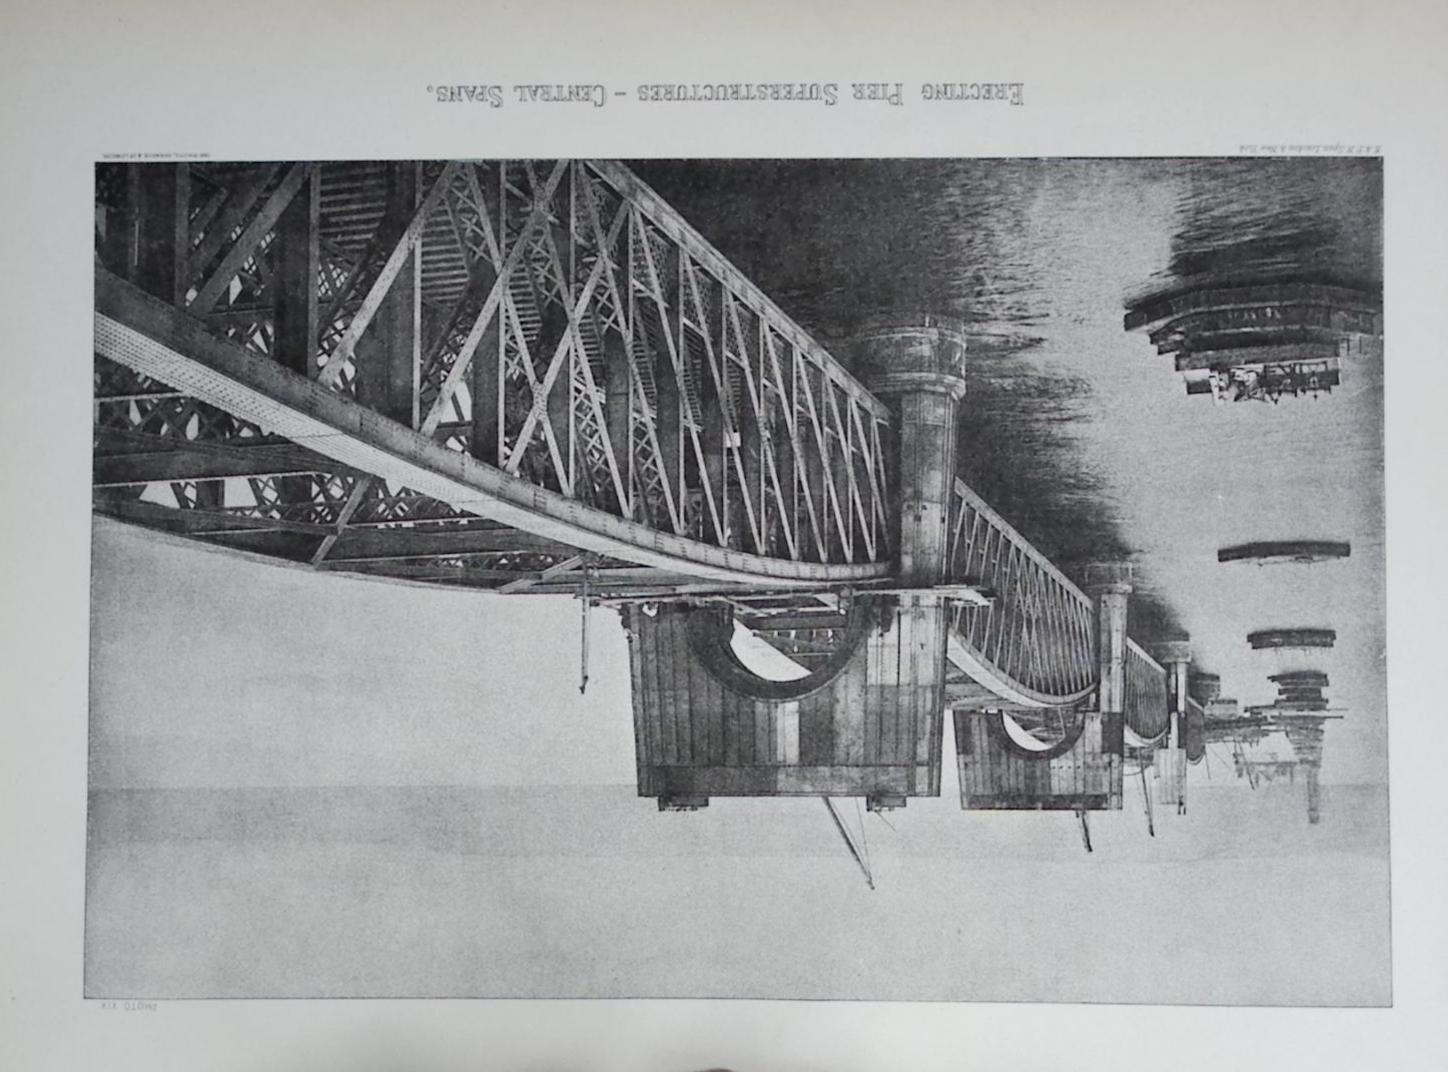 The New Tay Bridge. A Course of Lectures Delivered at the Royal School of Military Engineering at Chatham, November 1888.